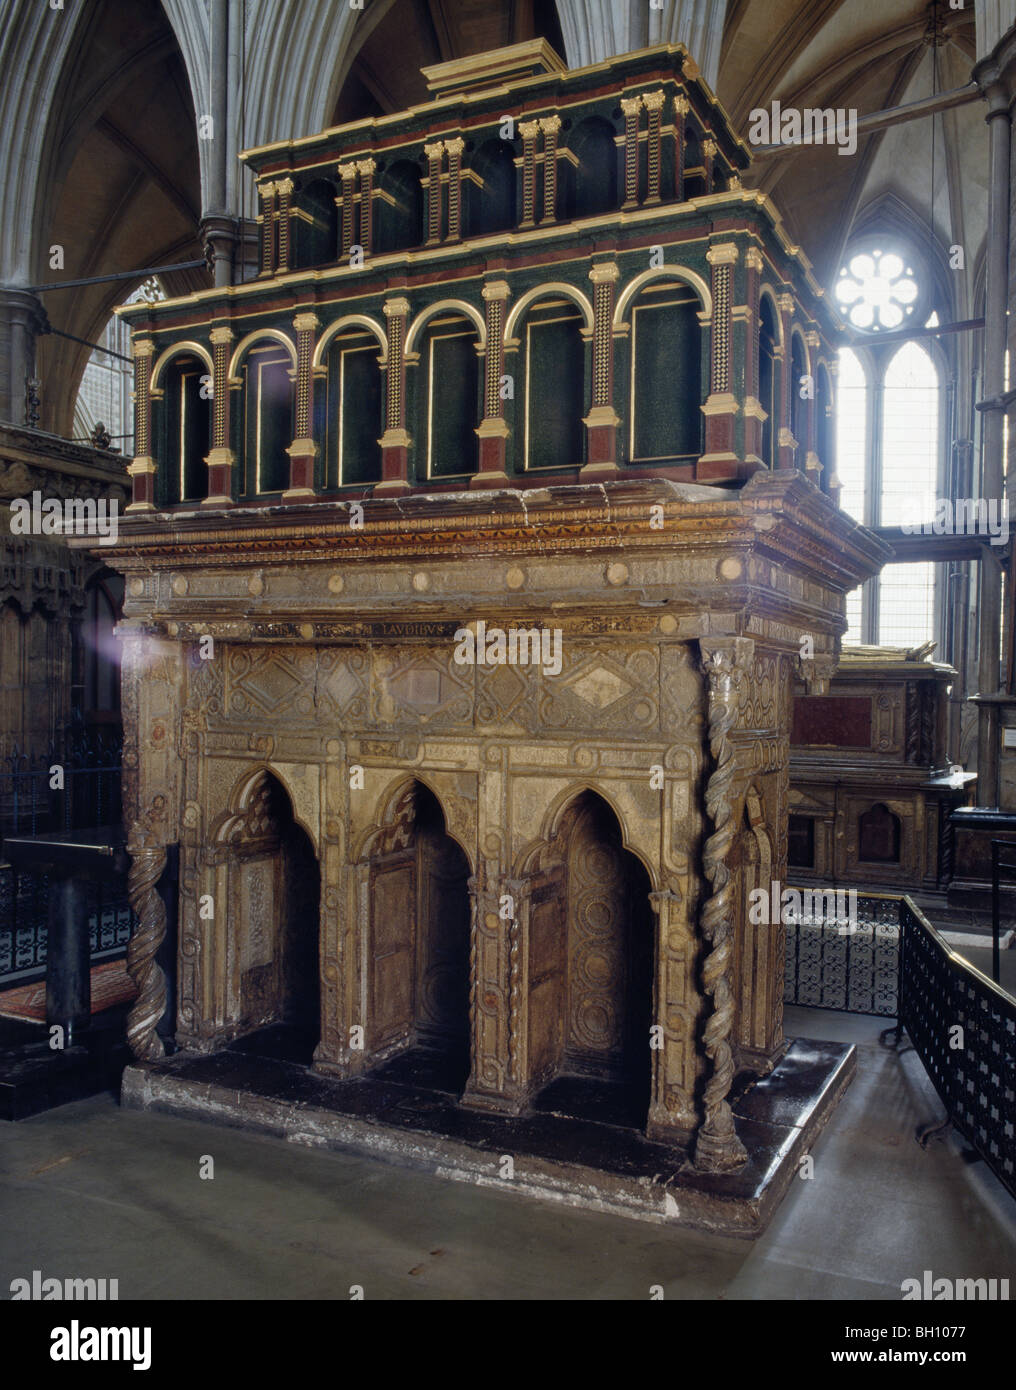 Shrine of Edward the Confessor (died 1066) behind High Altar of Westminster Abbey, London England. Stock Photo